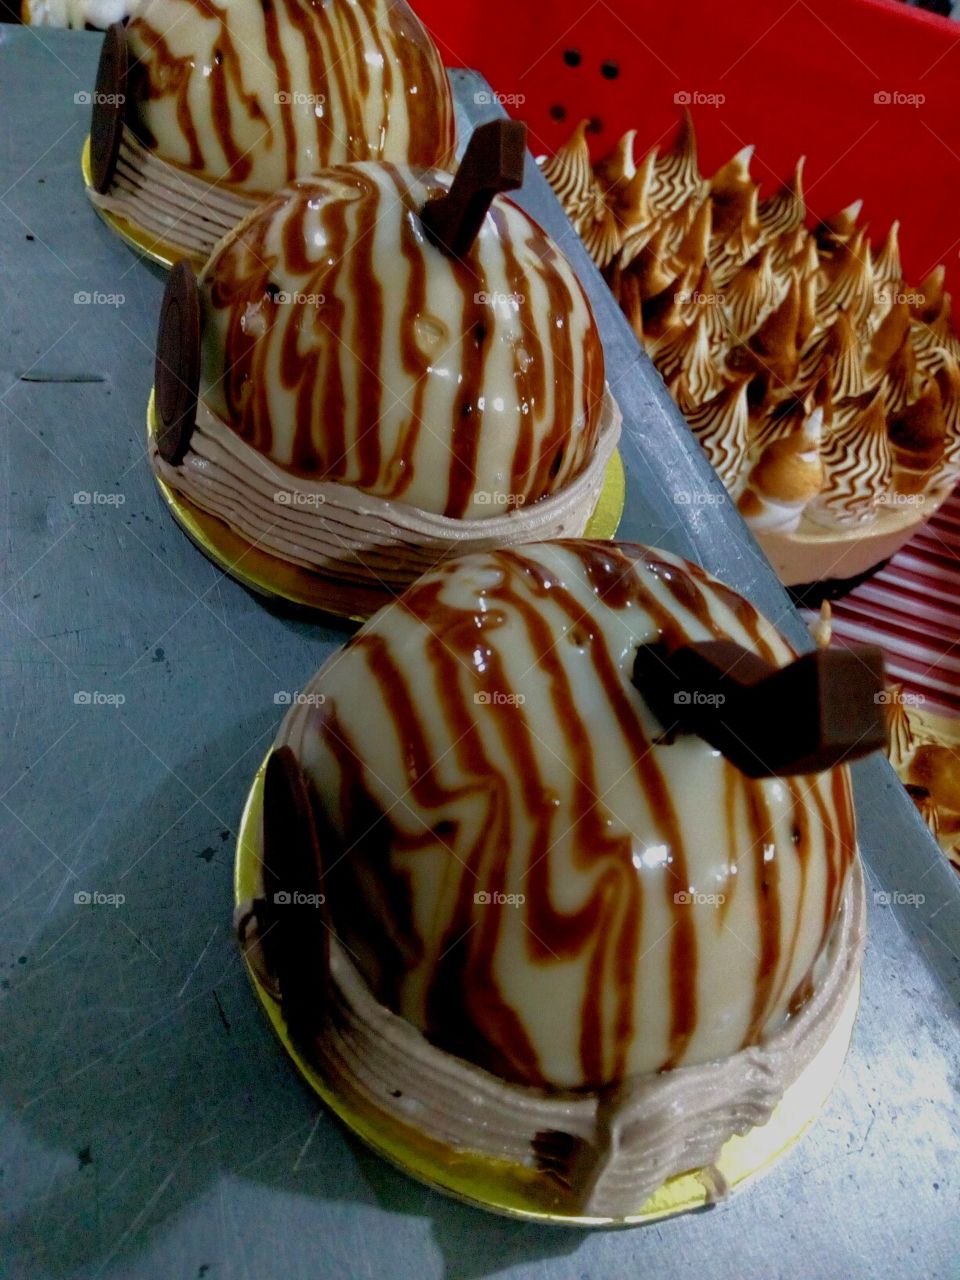 Choco Latte Dome By #Mrs Bakers
#ILovePastries